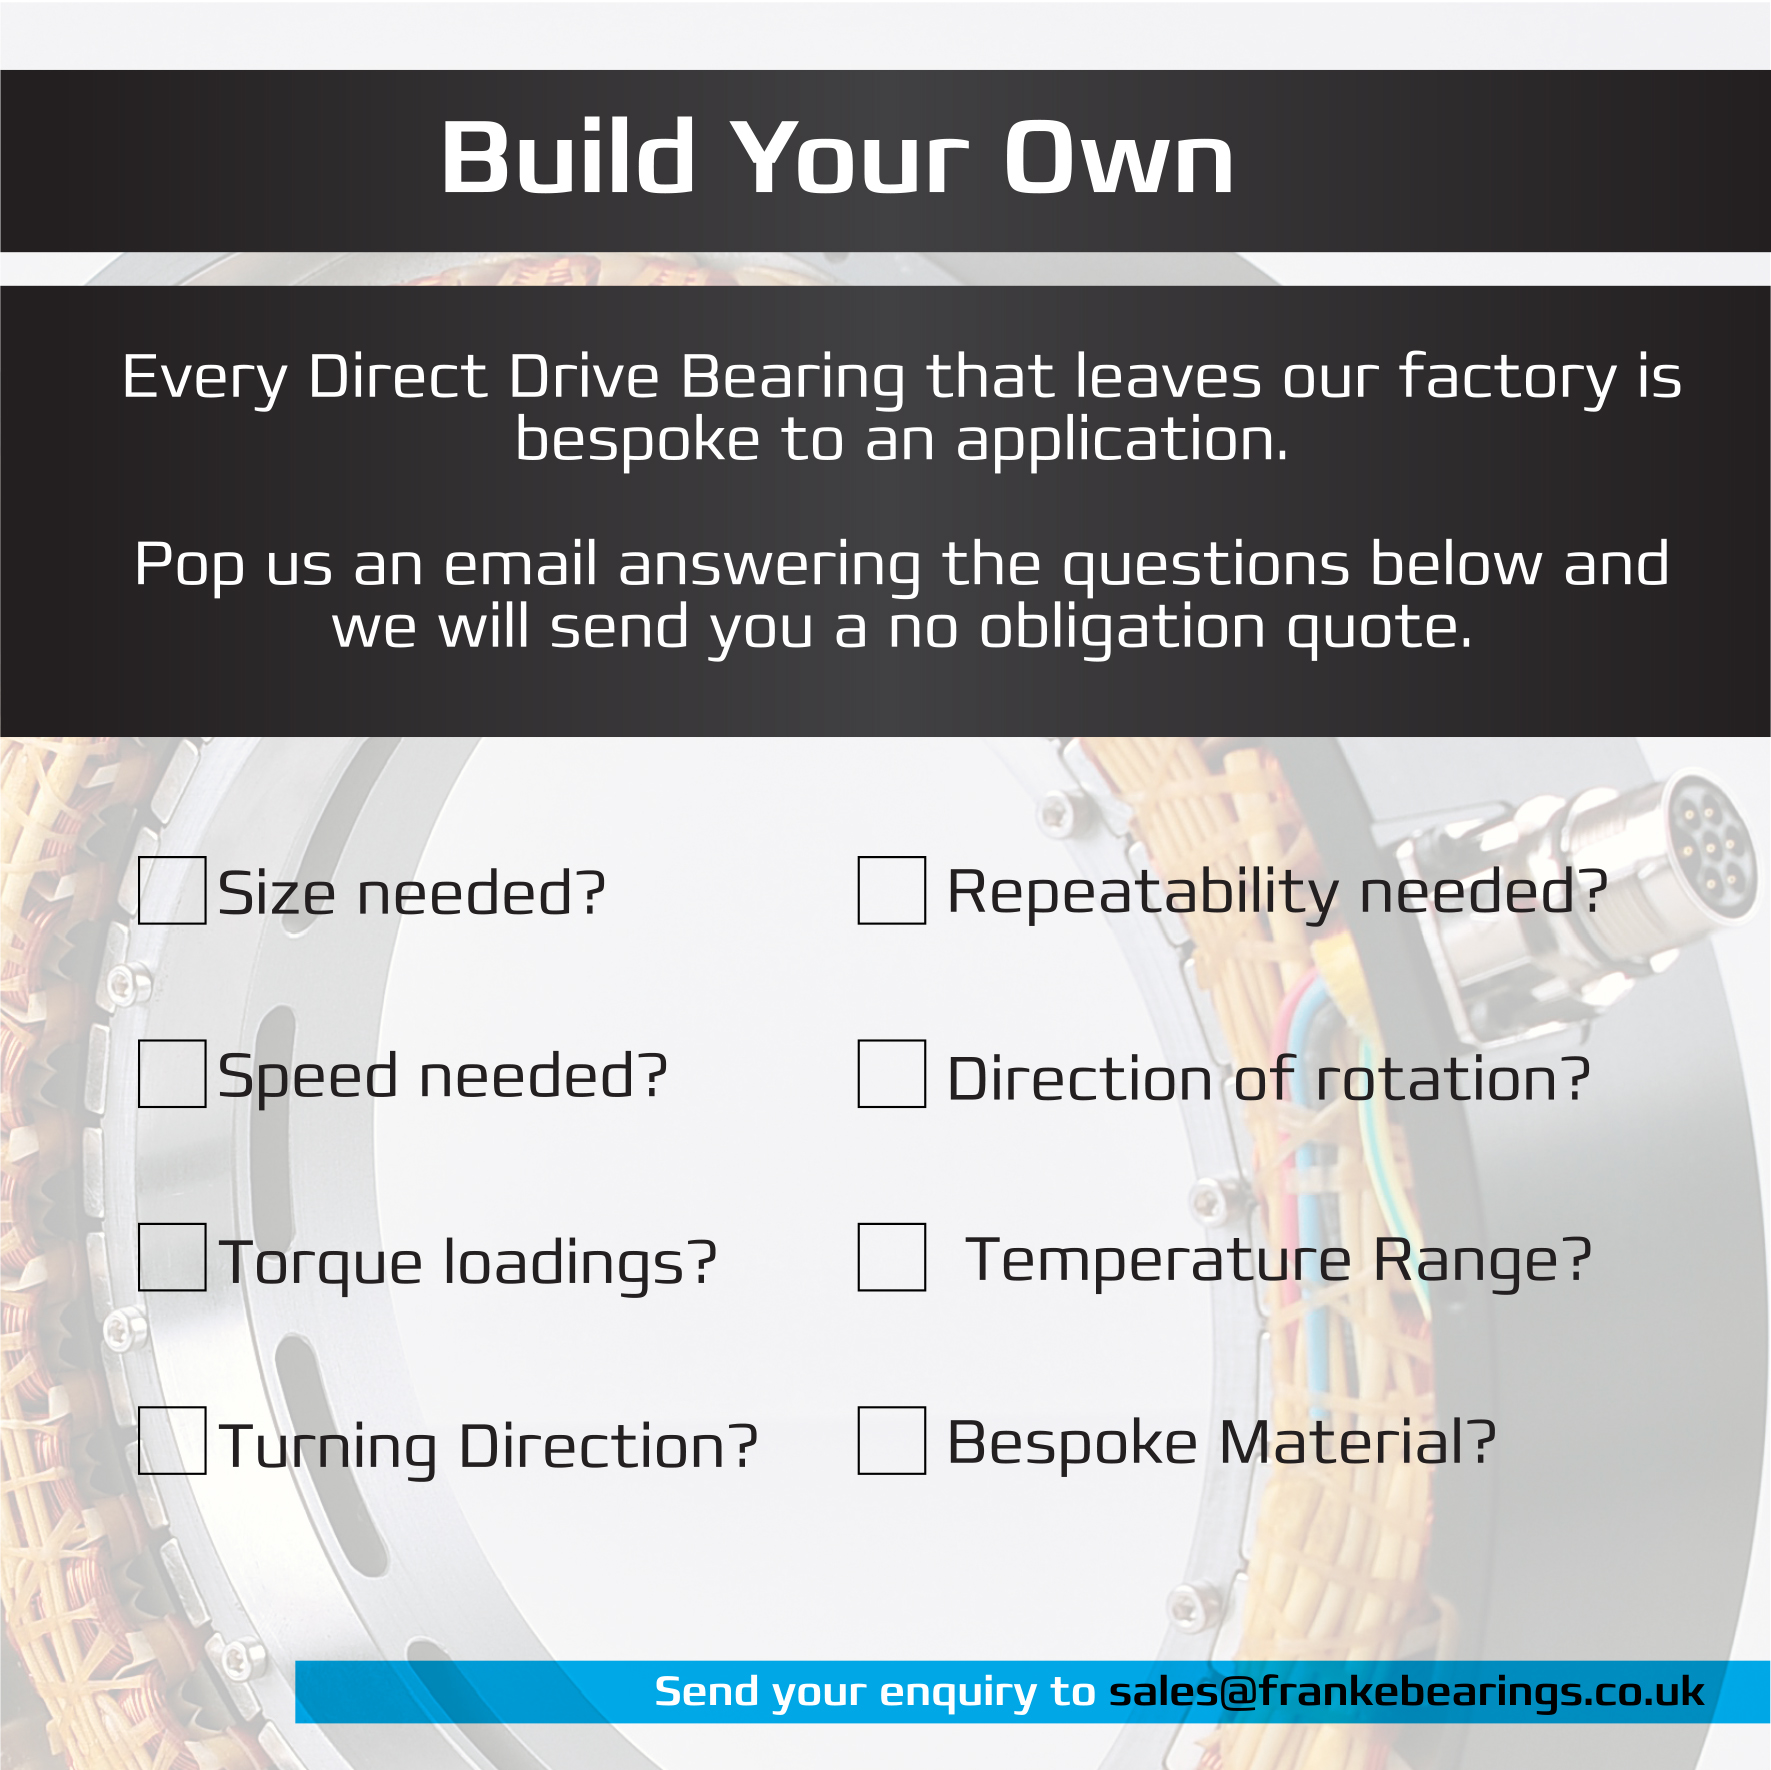 Build your own direct drive